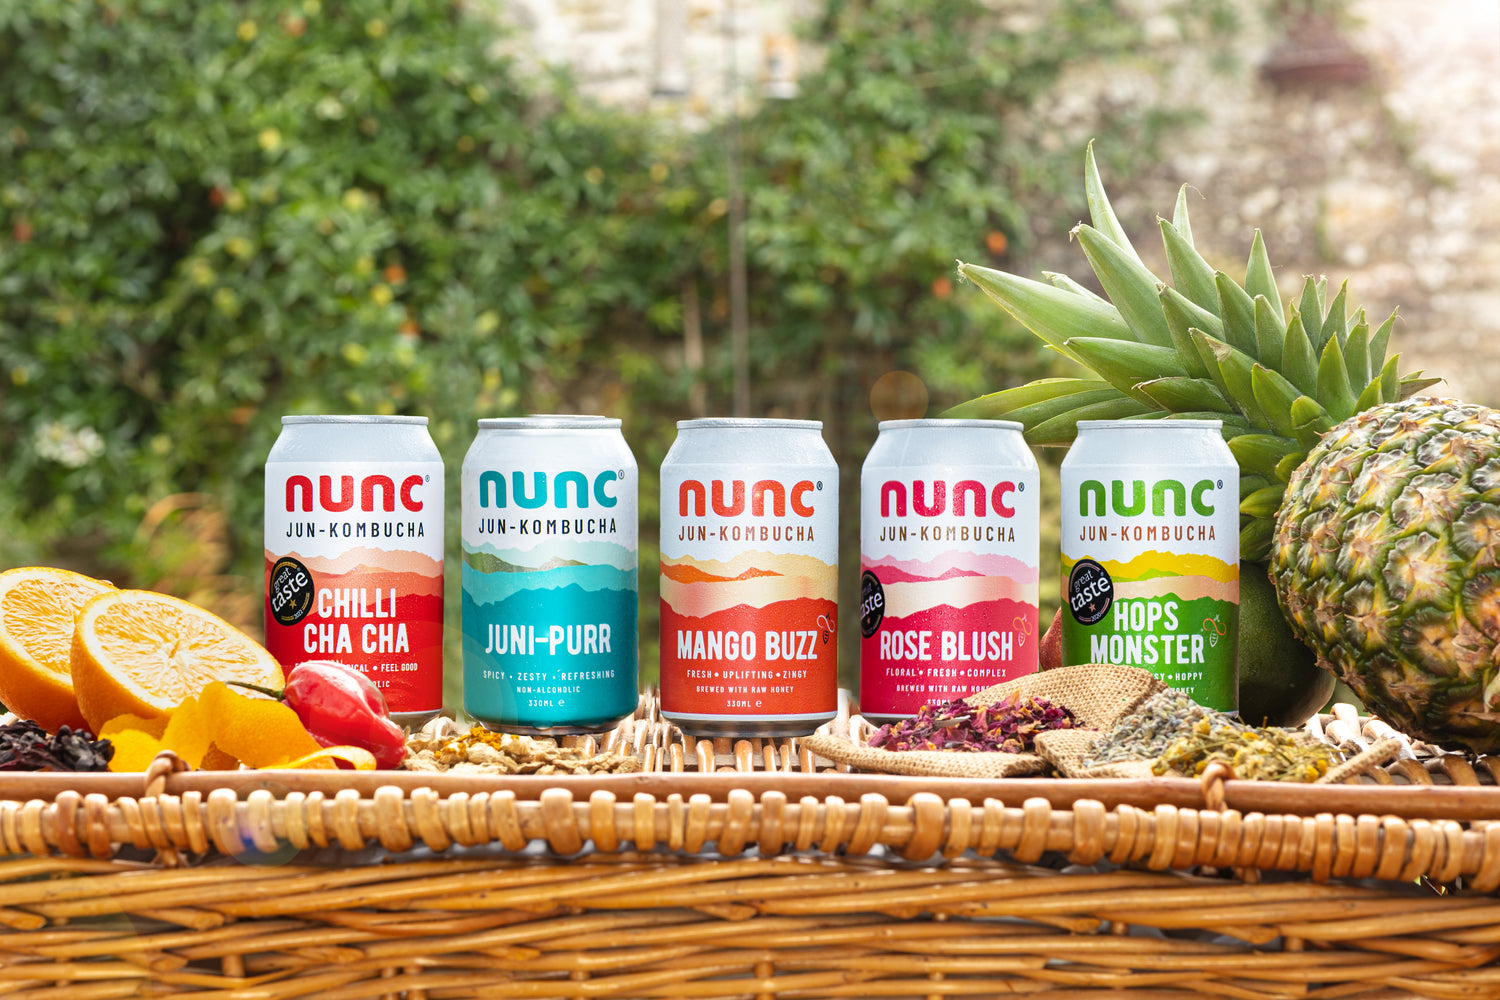 All natural, award winning and delicious nunc You & I Kombucha is available in five flavors to try now. Perfect alcohol alternatives